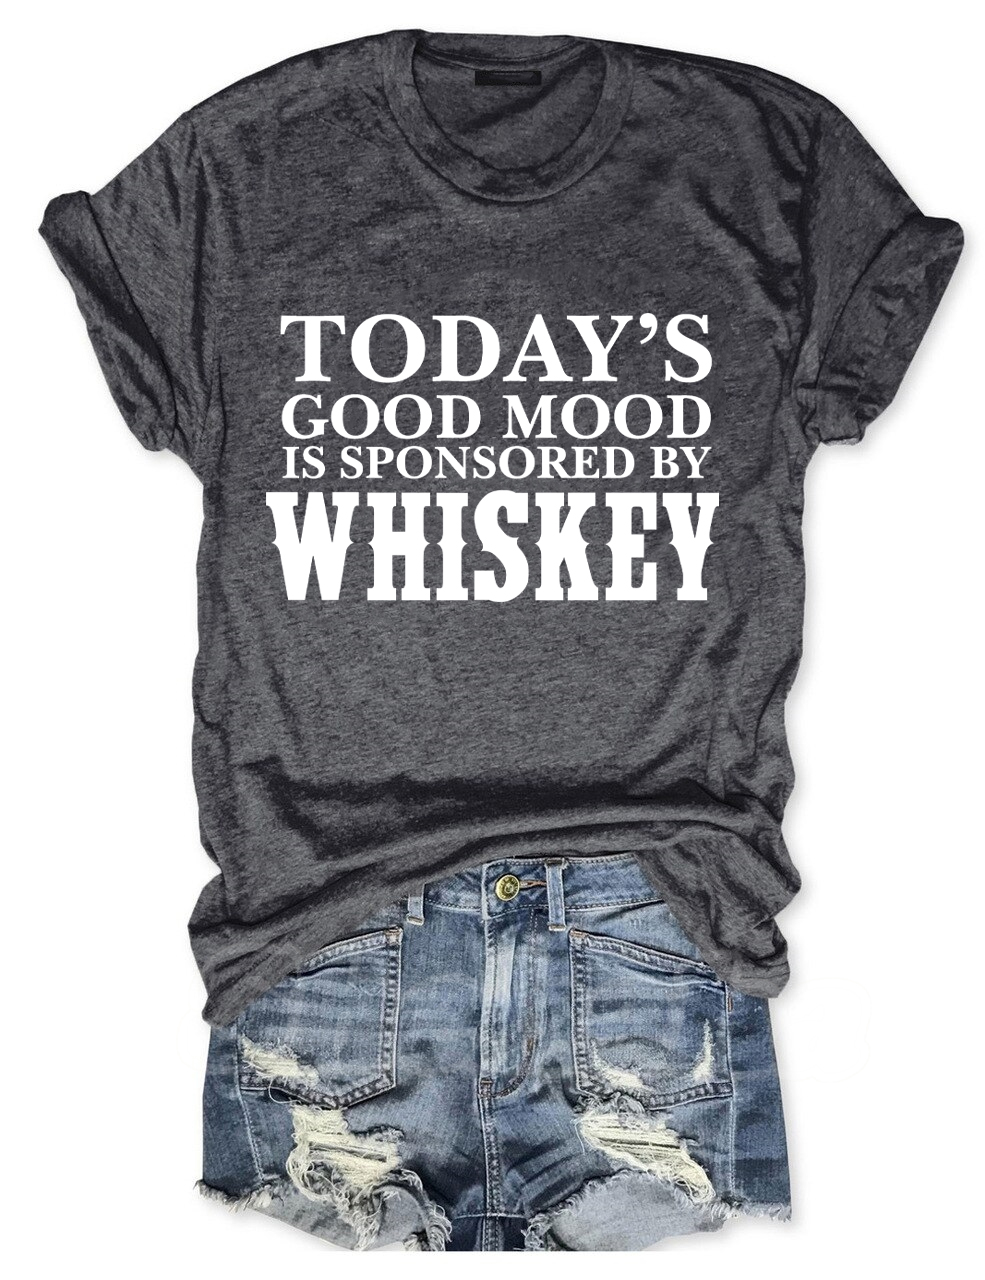 Today's Good Mood Is Sponsored By Whiskey T-Shirt